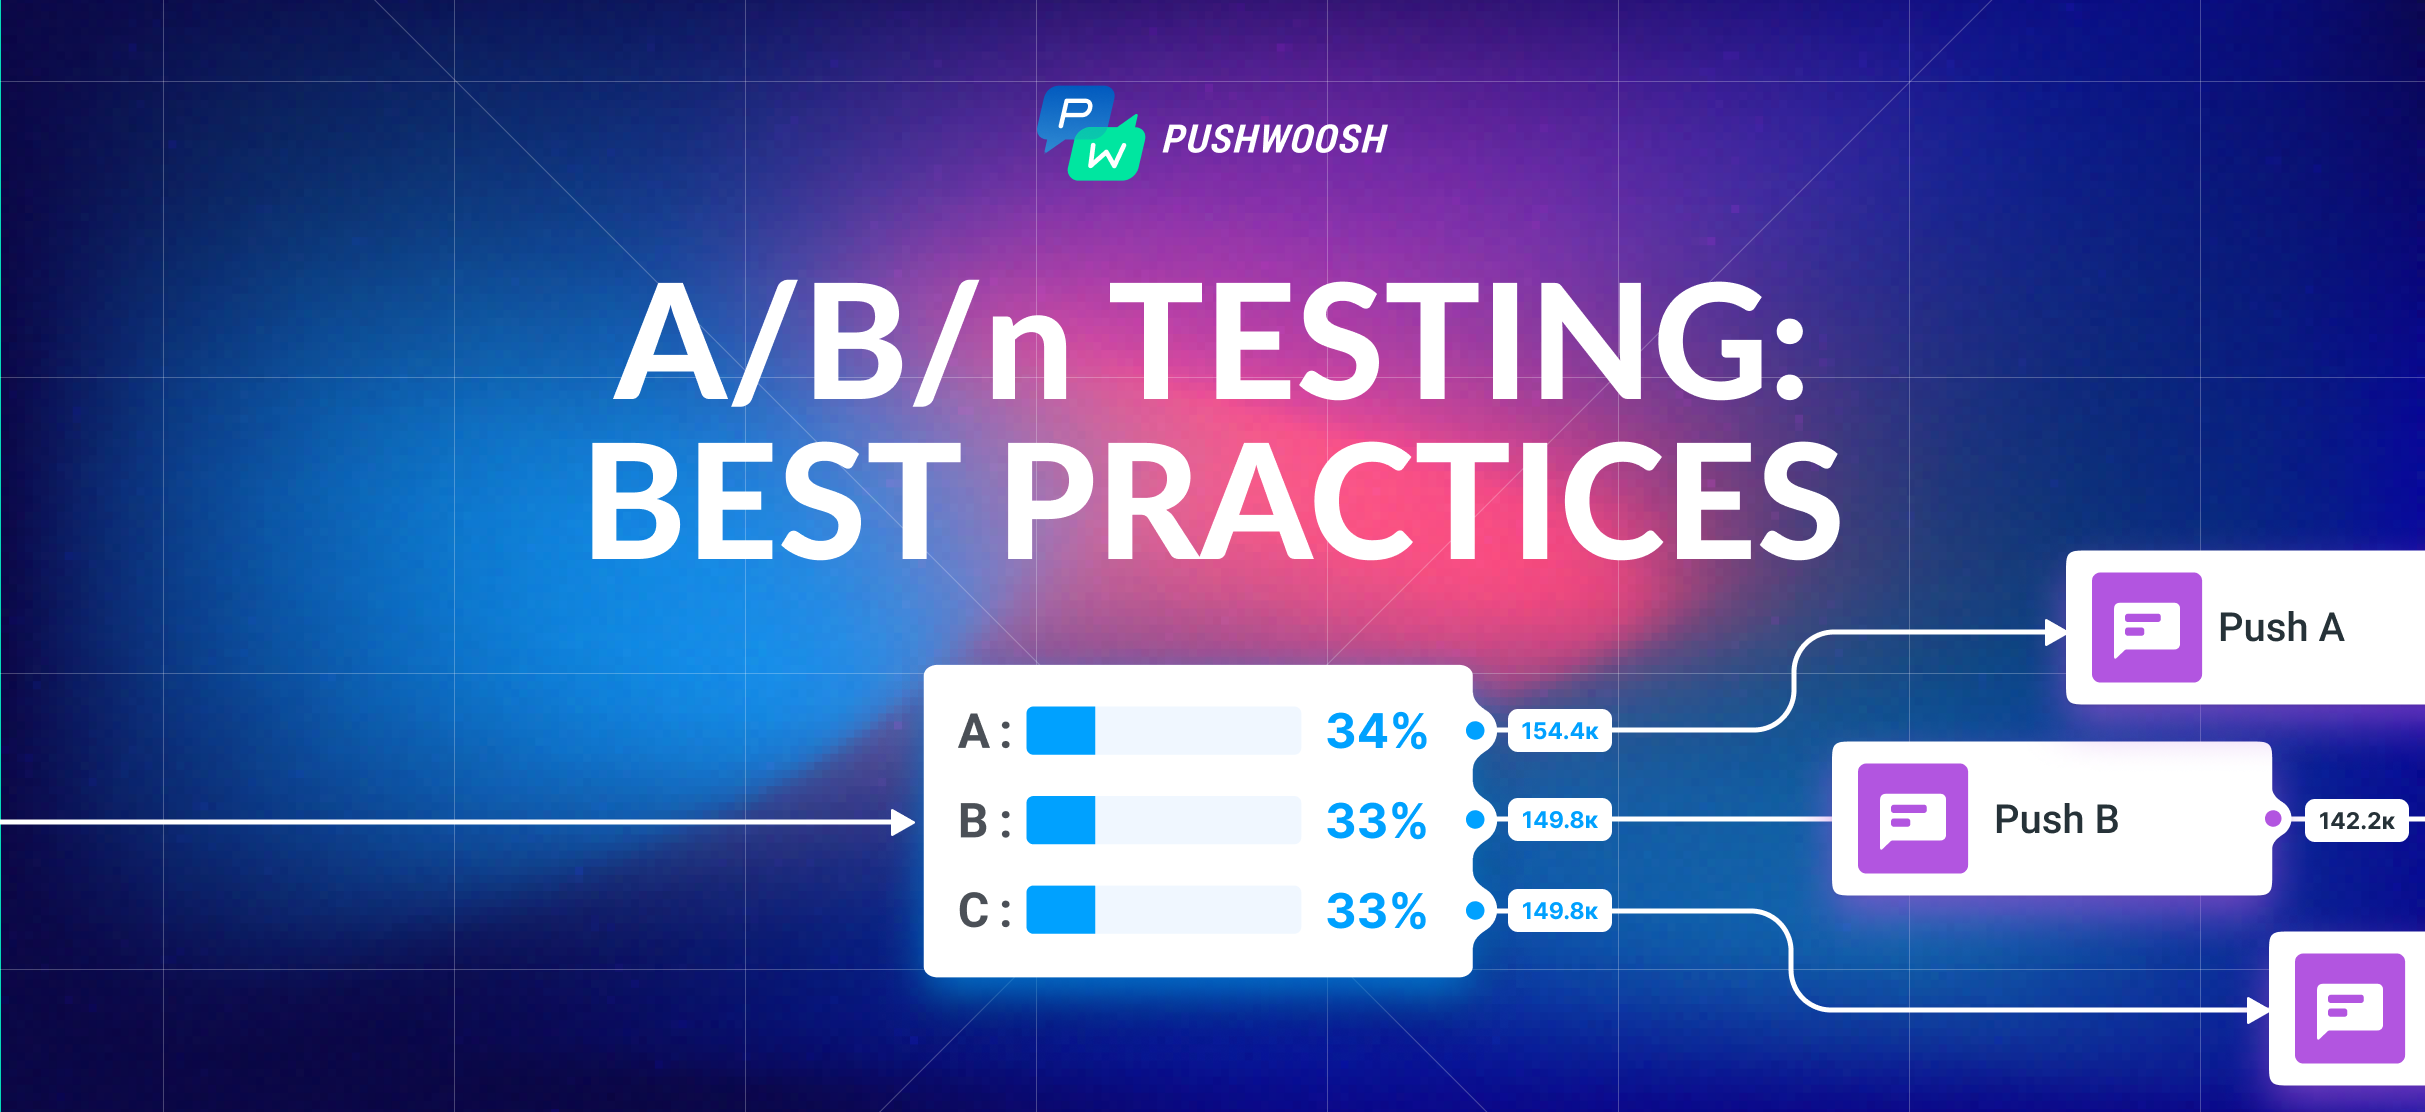 From Guesswork to Experimentation: Increase Your ROI with Push Notification A/B/n Testing